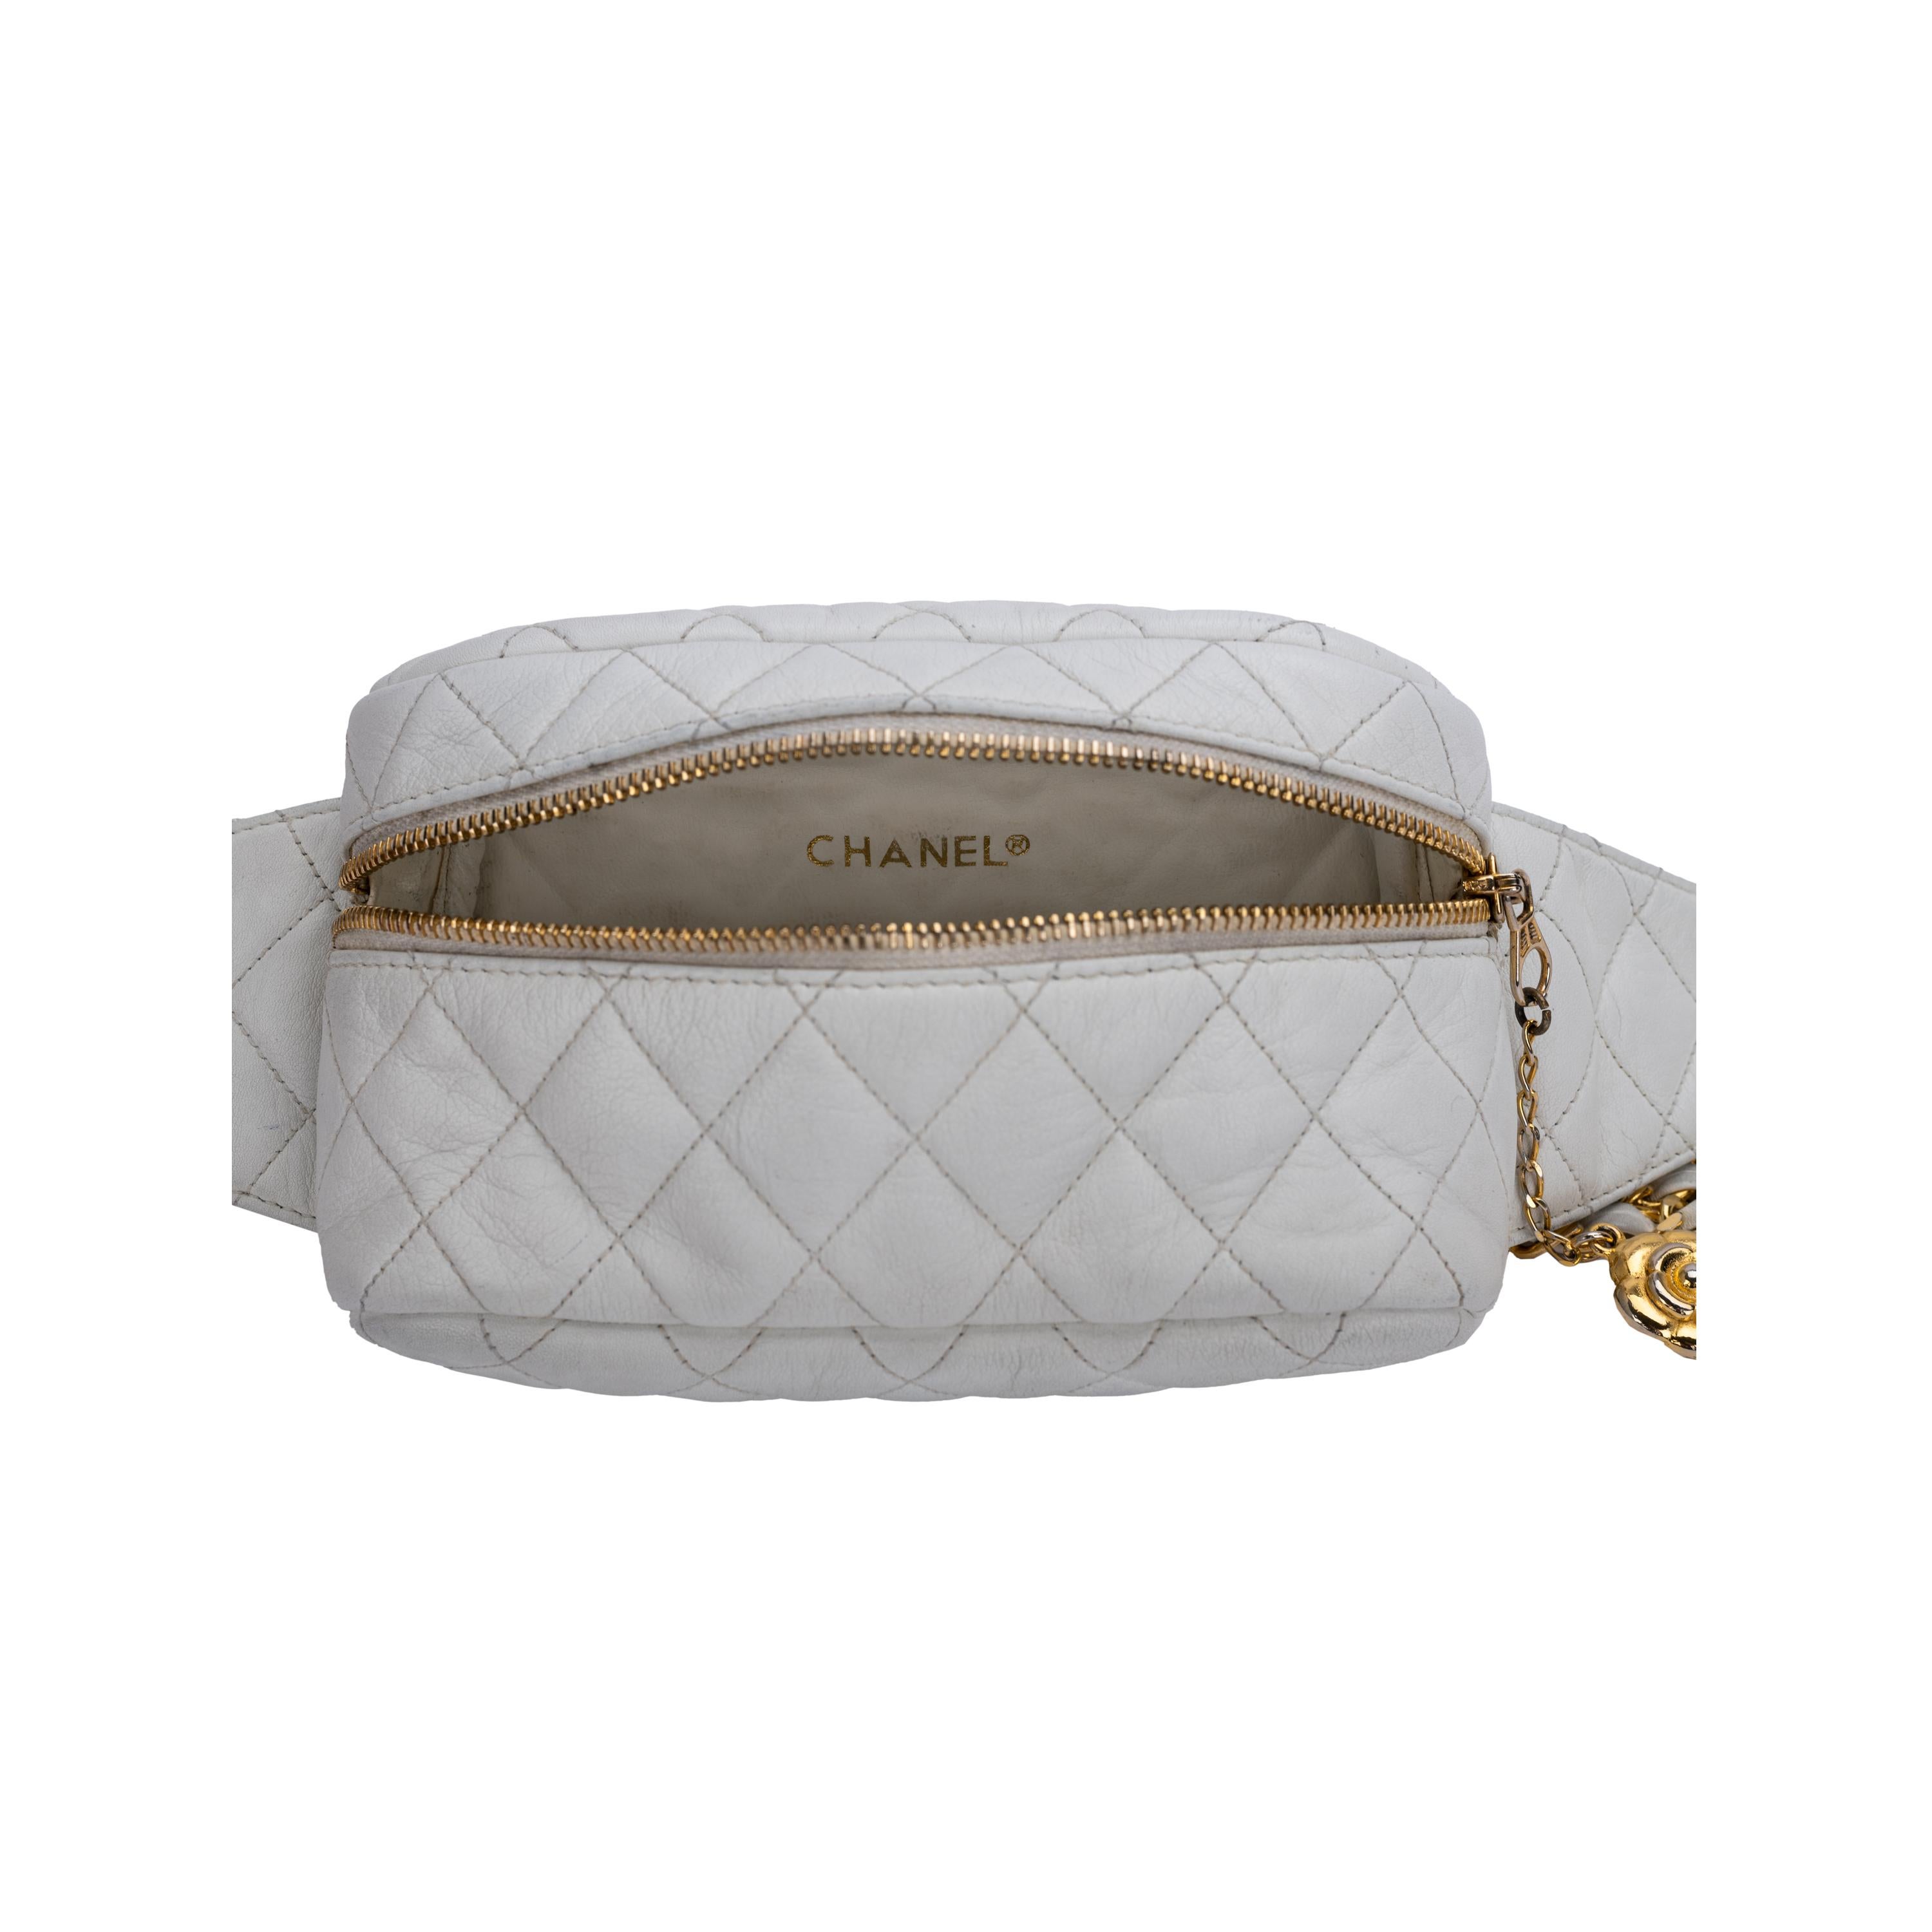 Chanel White Quilted Belt Bag - '90s In Good Condition For Sale In Milano, IT